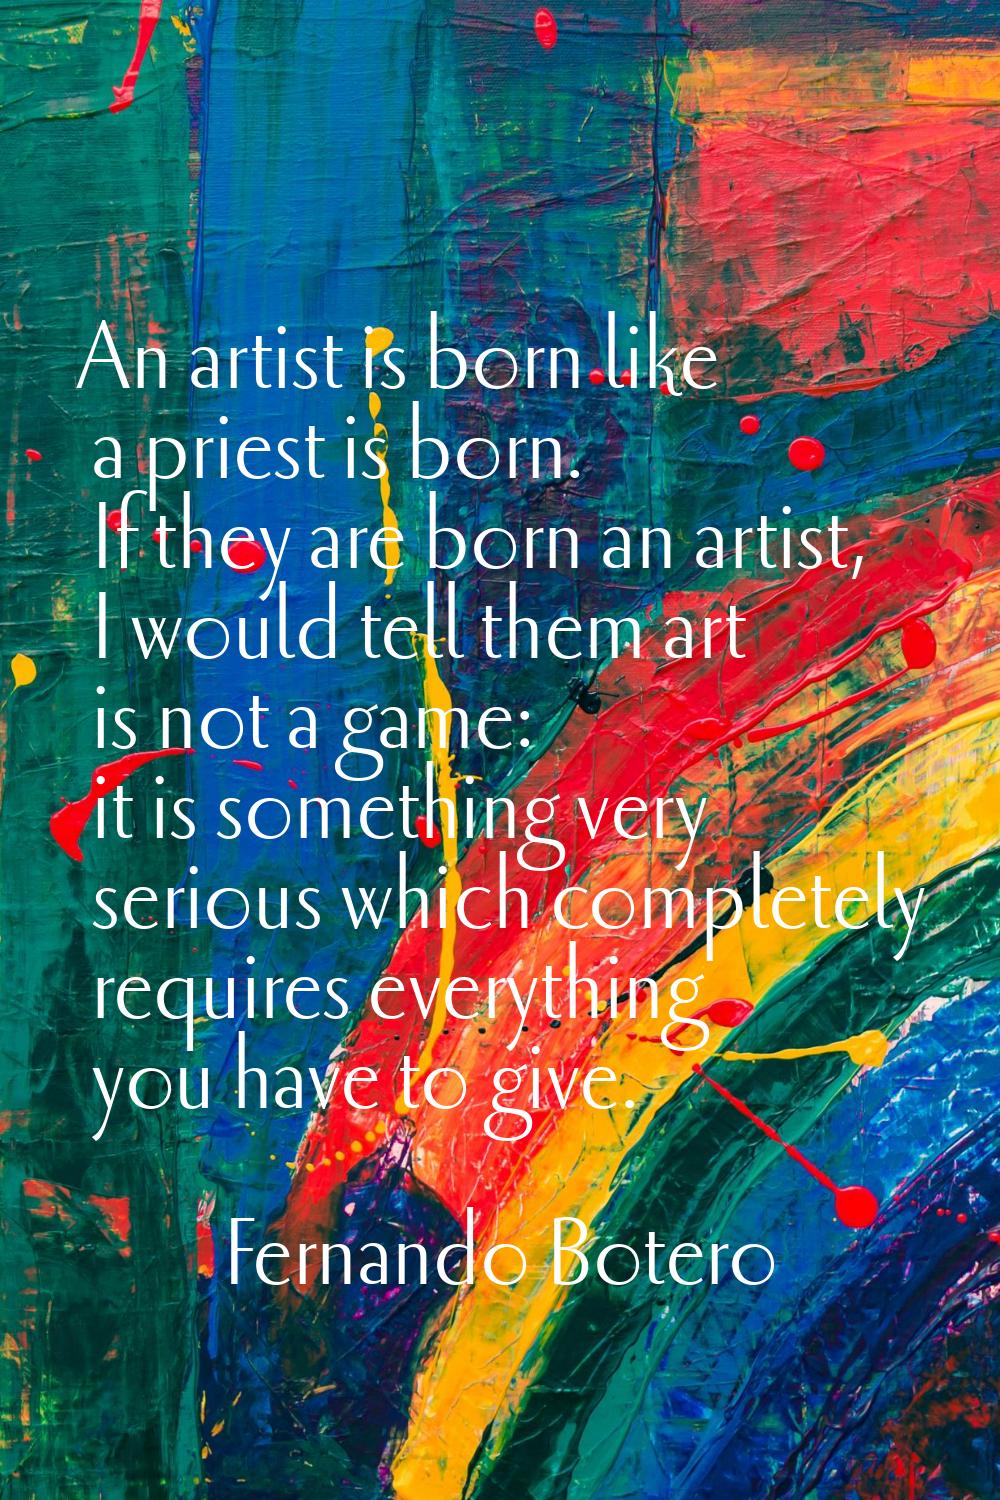 An artist is born like a priest is born. If they are born an artist, I would tell them art is not a